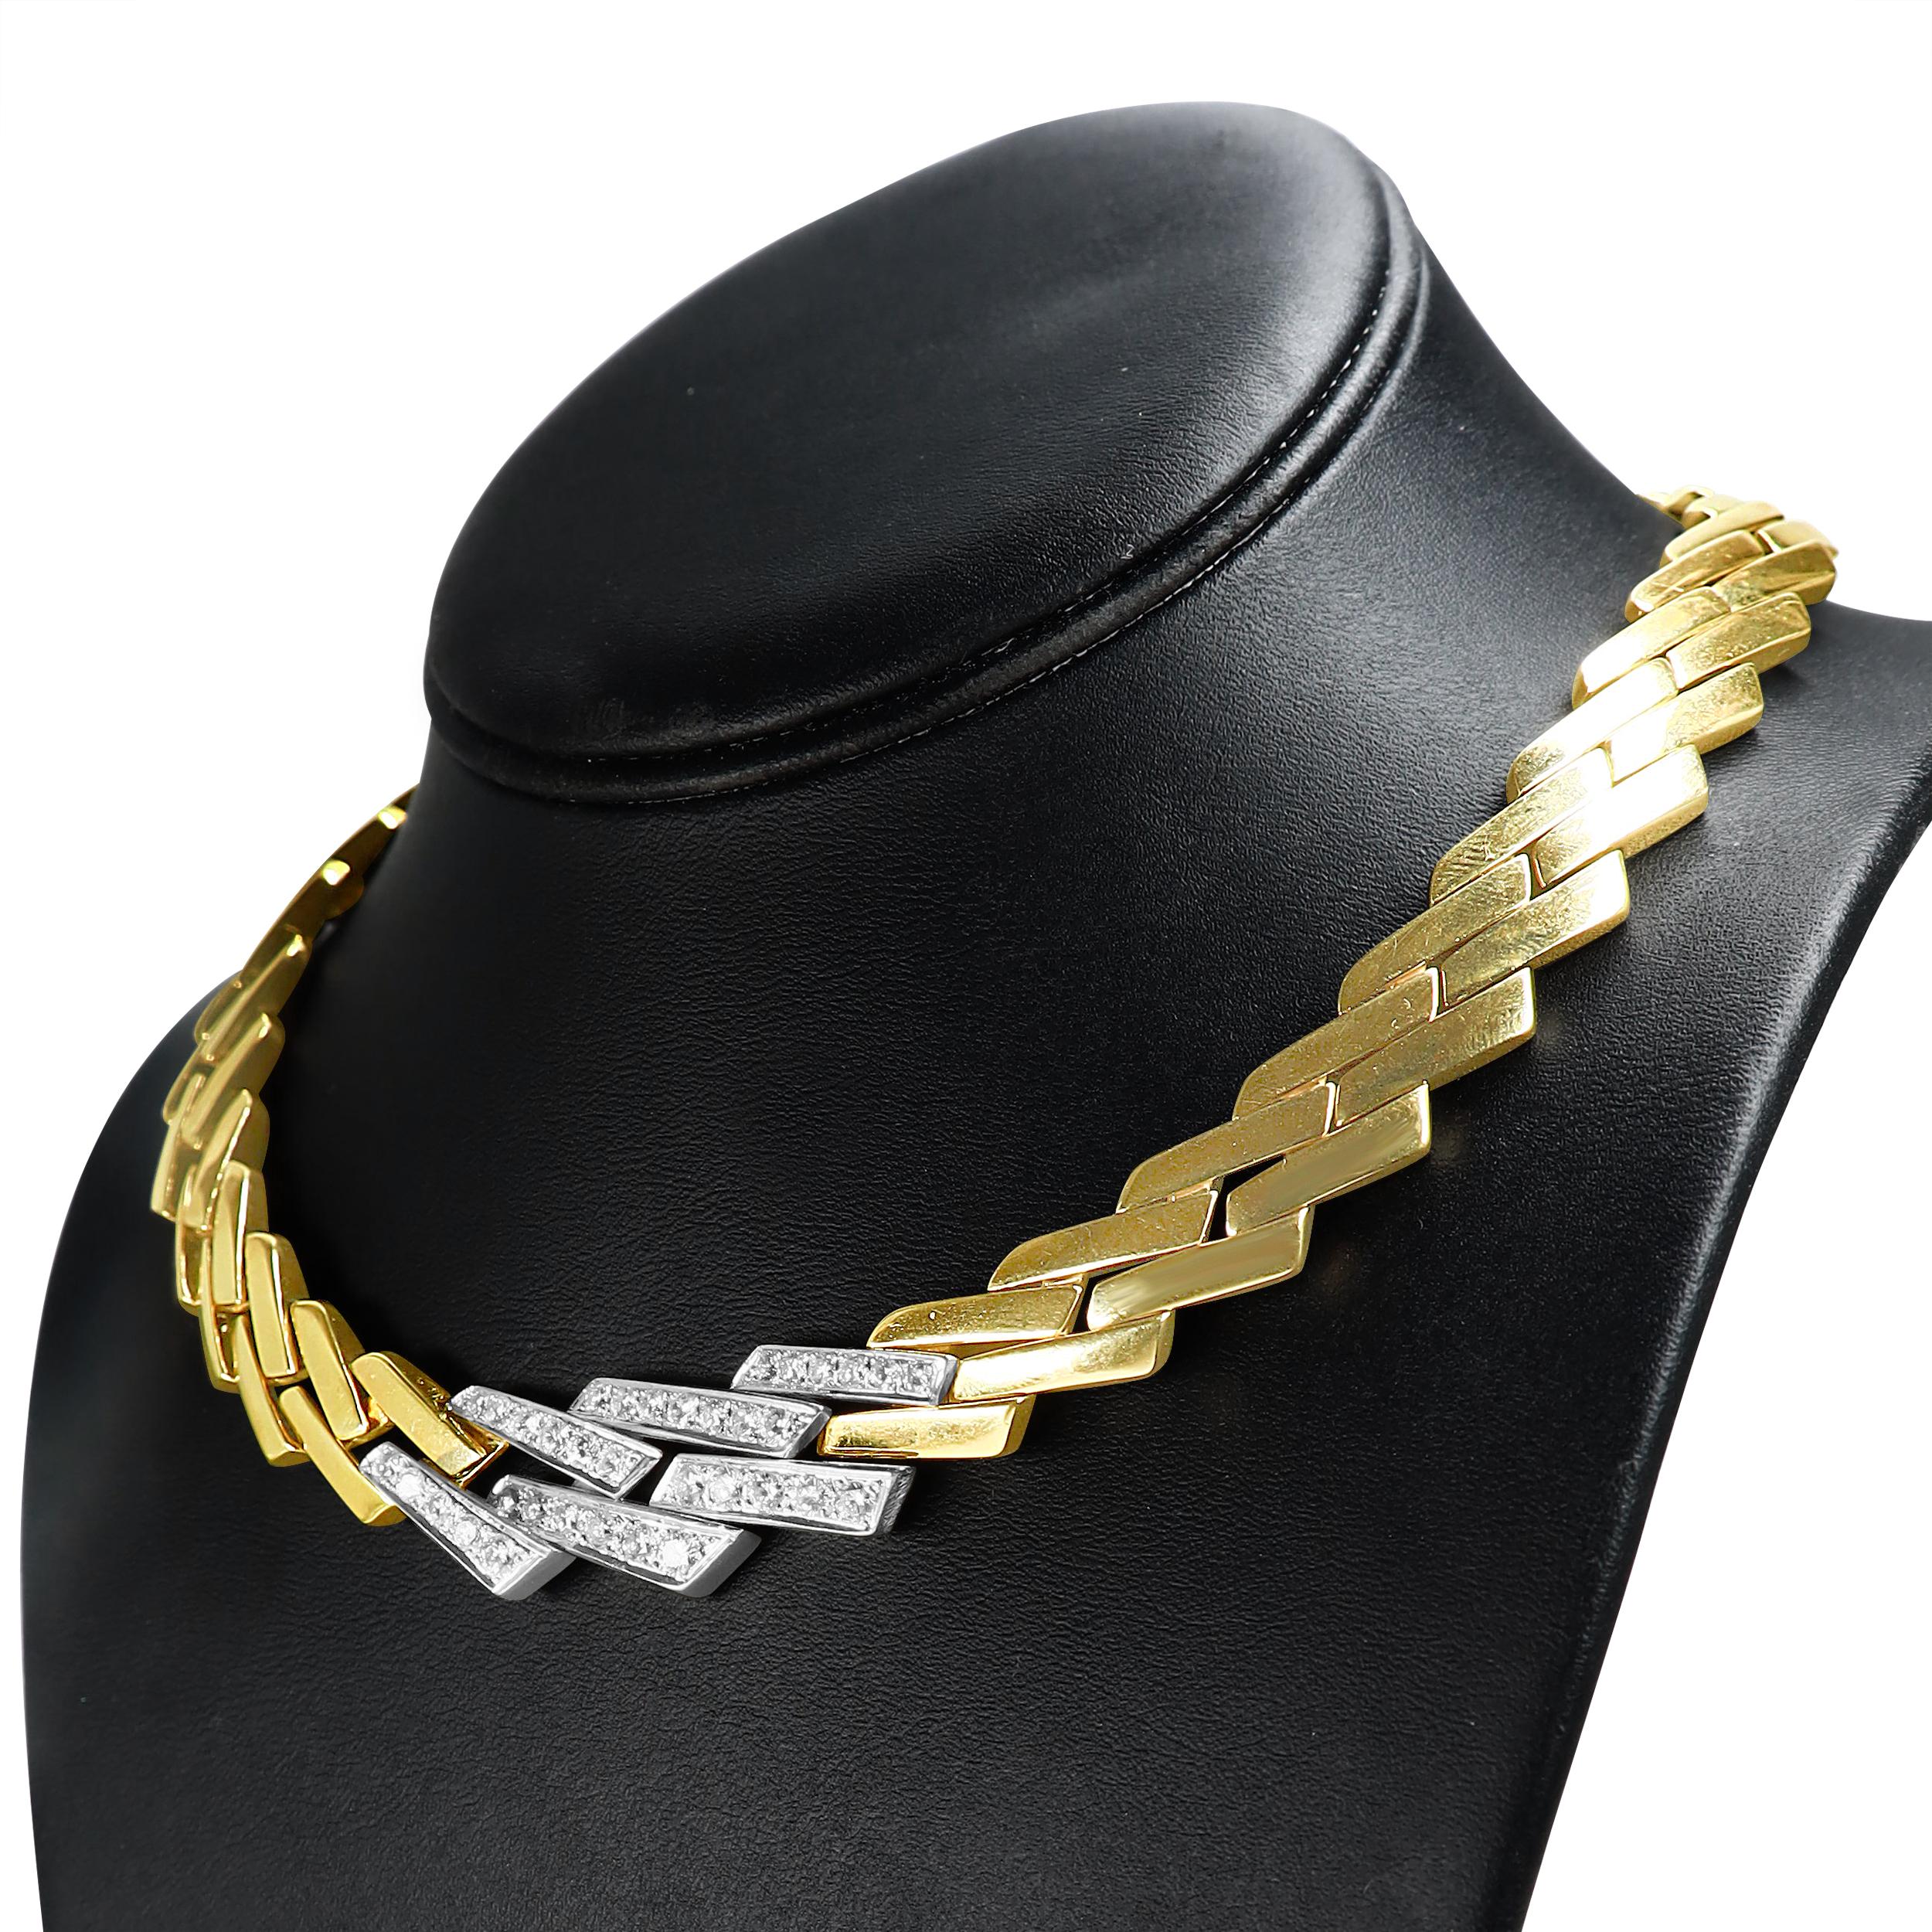 Go big and bold with this sleek women's Miami Cuban Curb Link Chain Necklace. This trendy necklace is represented in lustrous 14k yellow gold and is set with dazzling round-cut diamonds in a pave setting on the six center links. Boasting the perfect